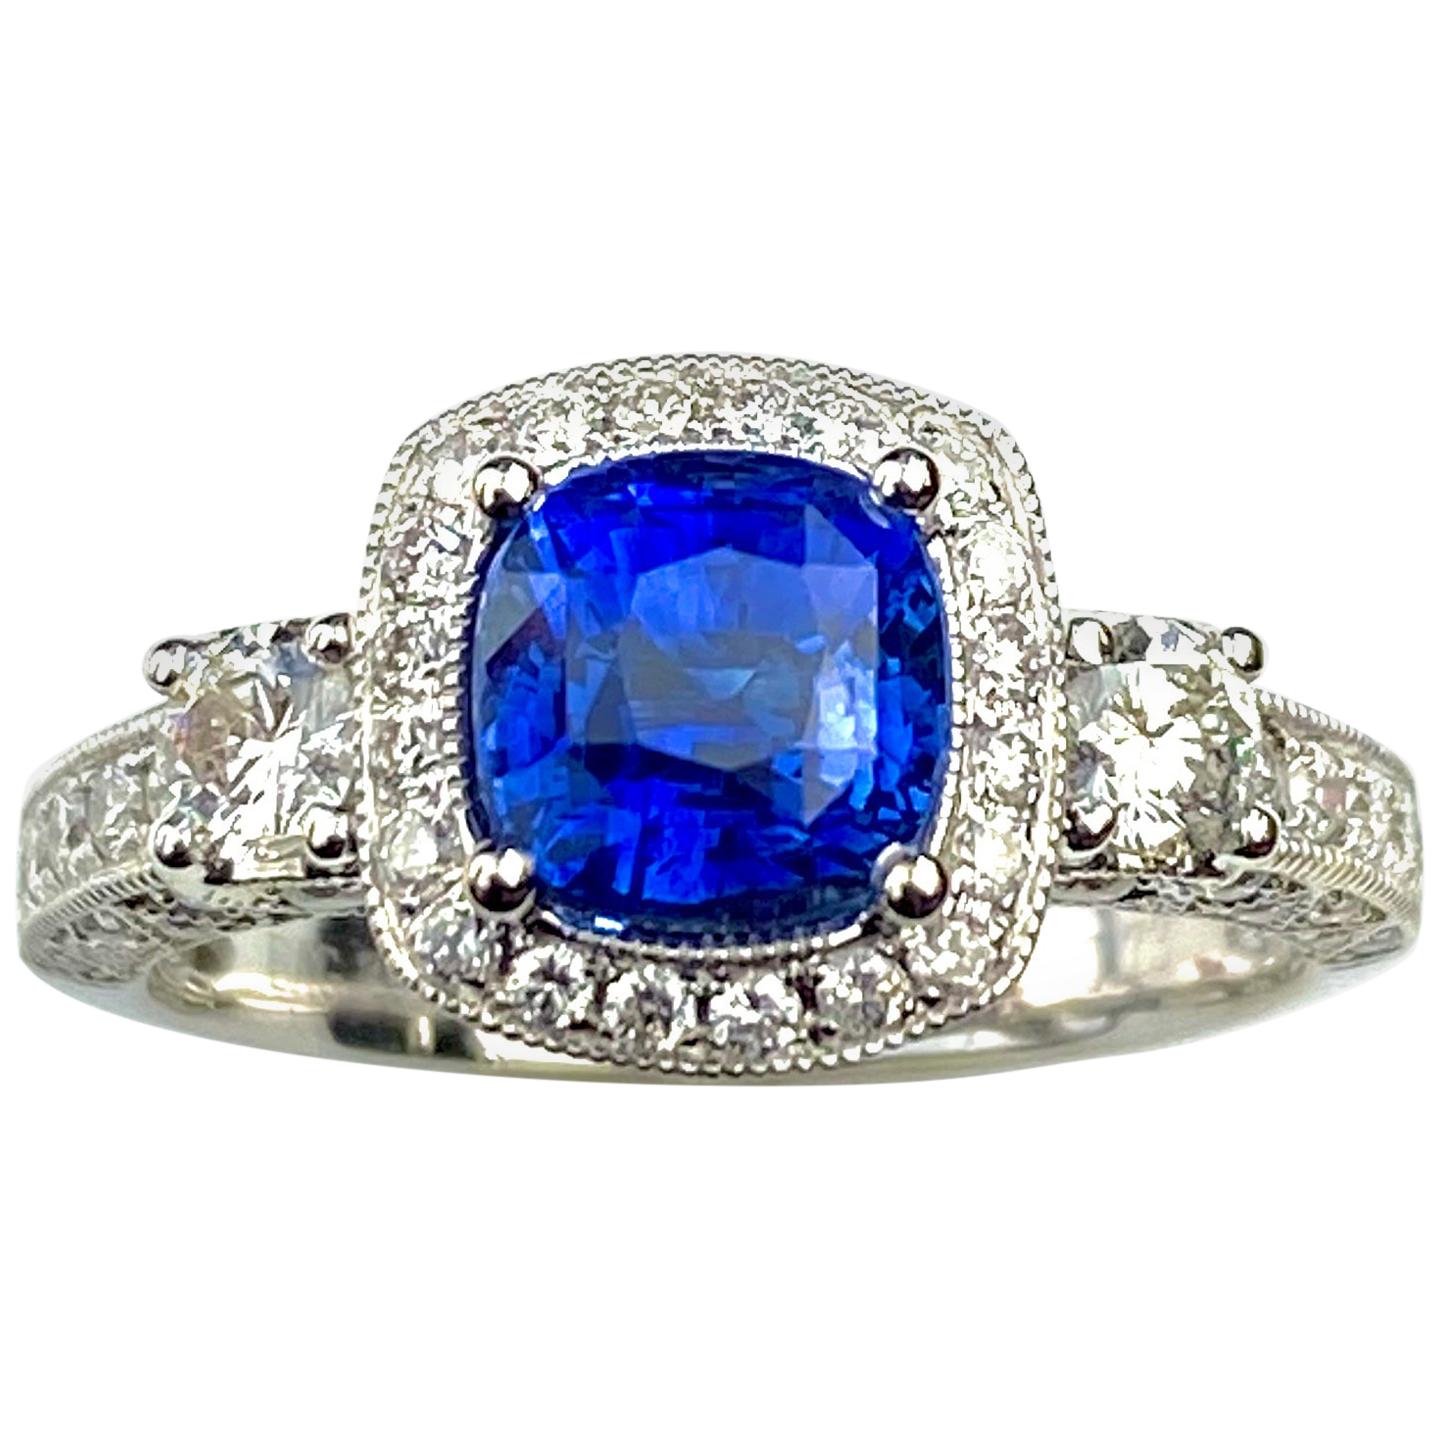 Blue Sapphire Cushion Cut Antique Style Ring with White Diamond Details For Sale